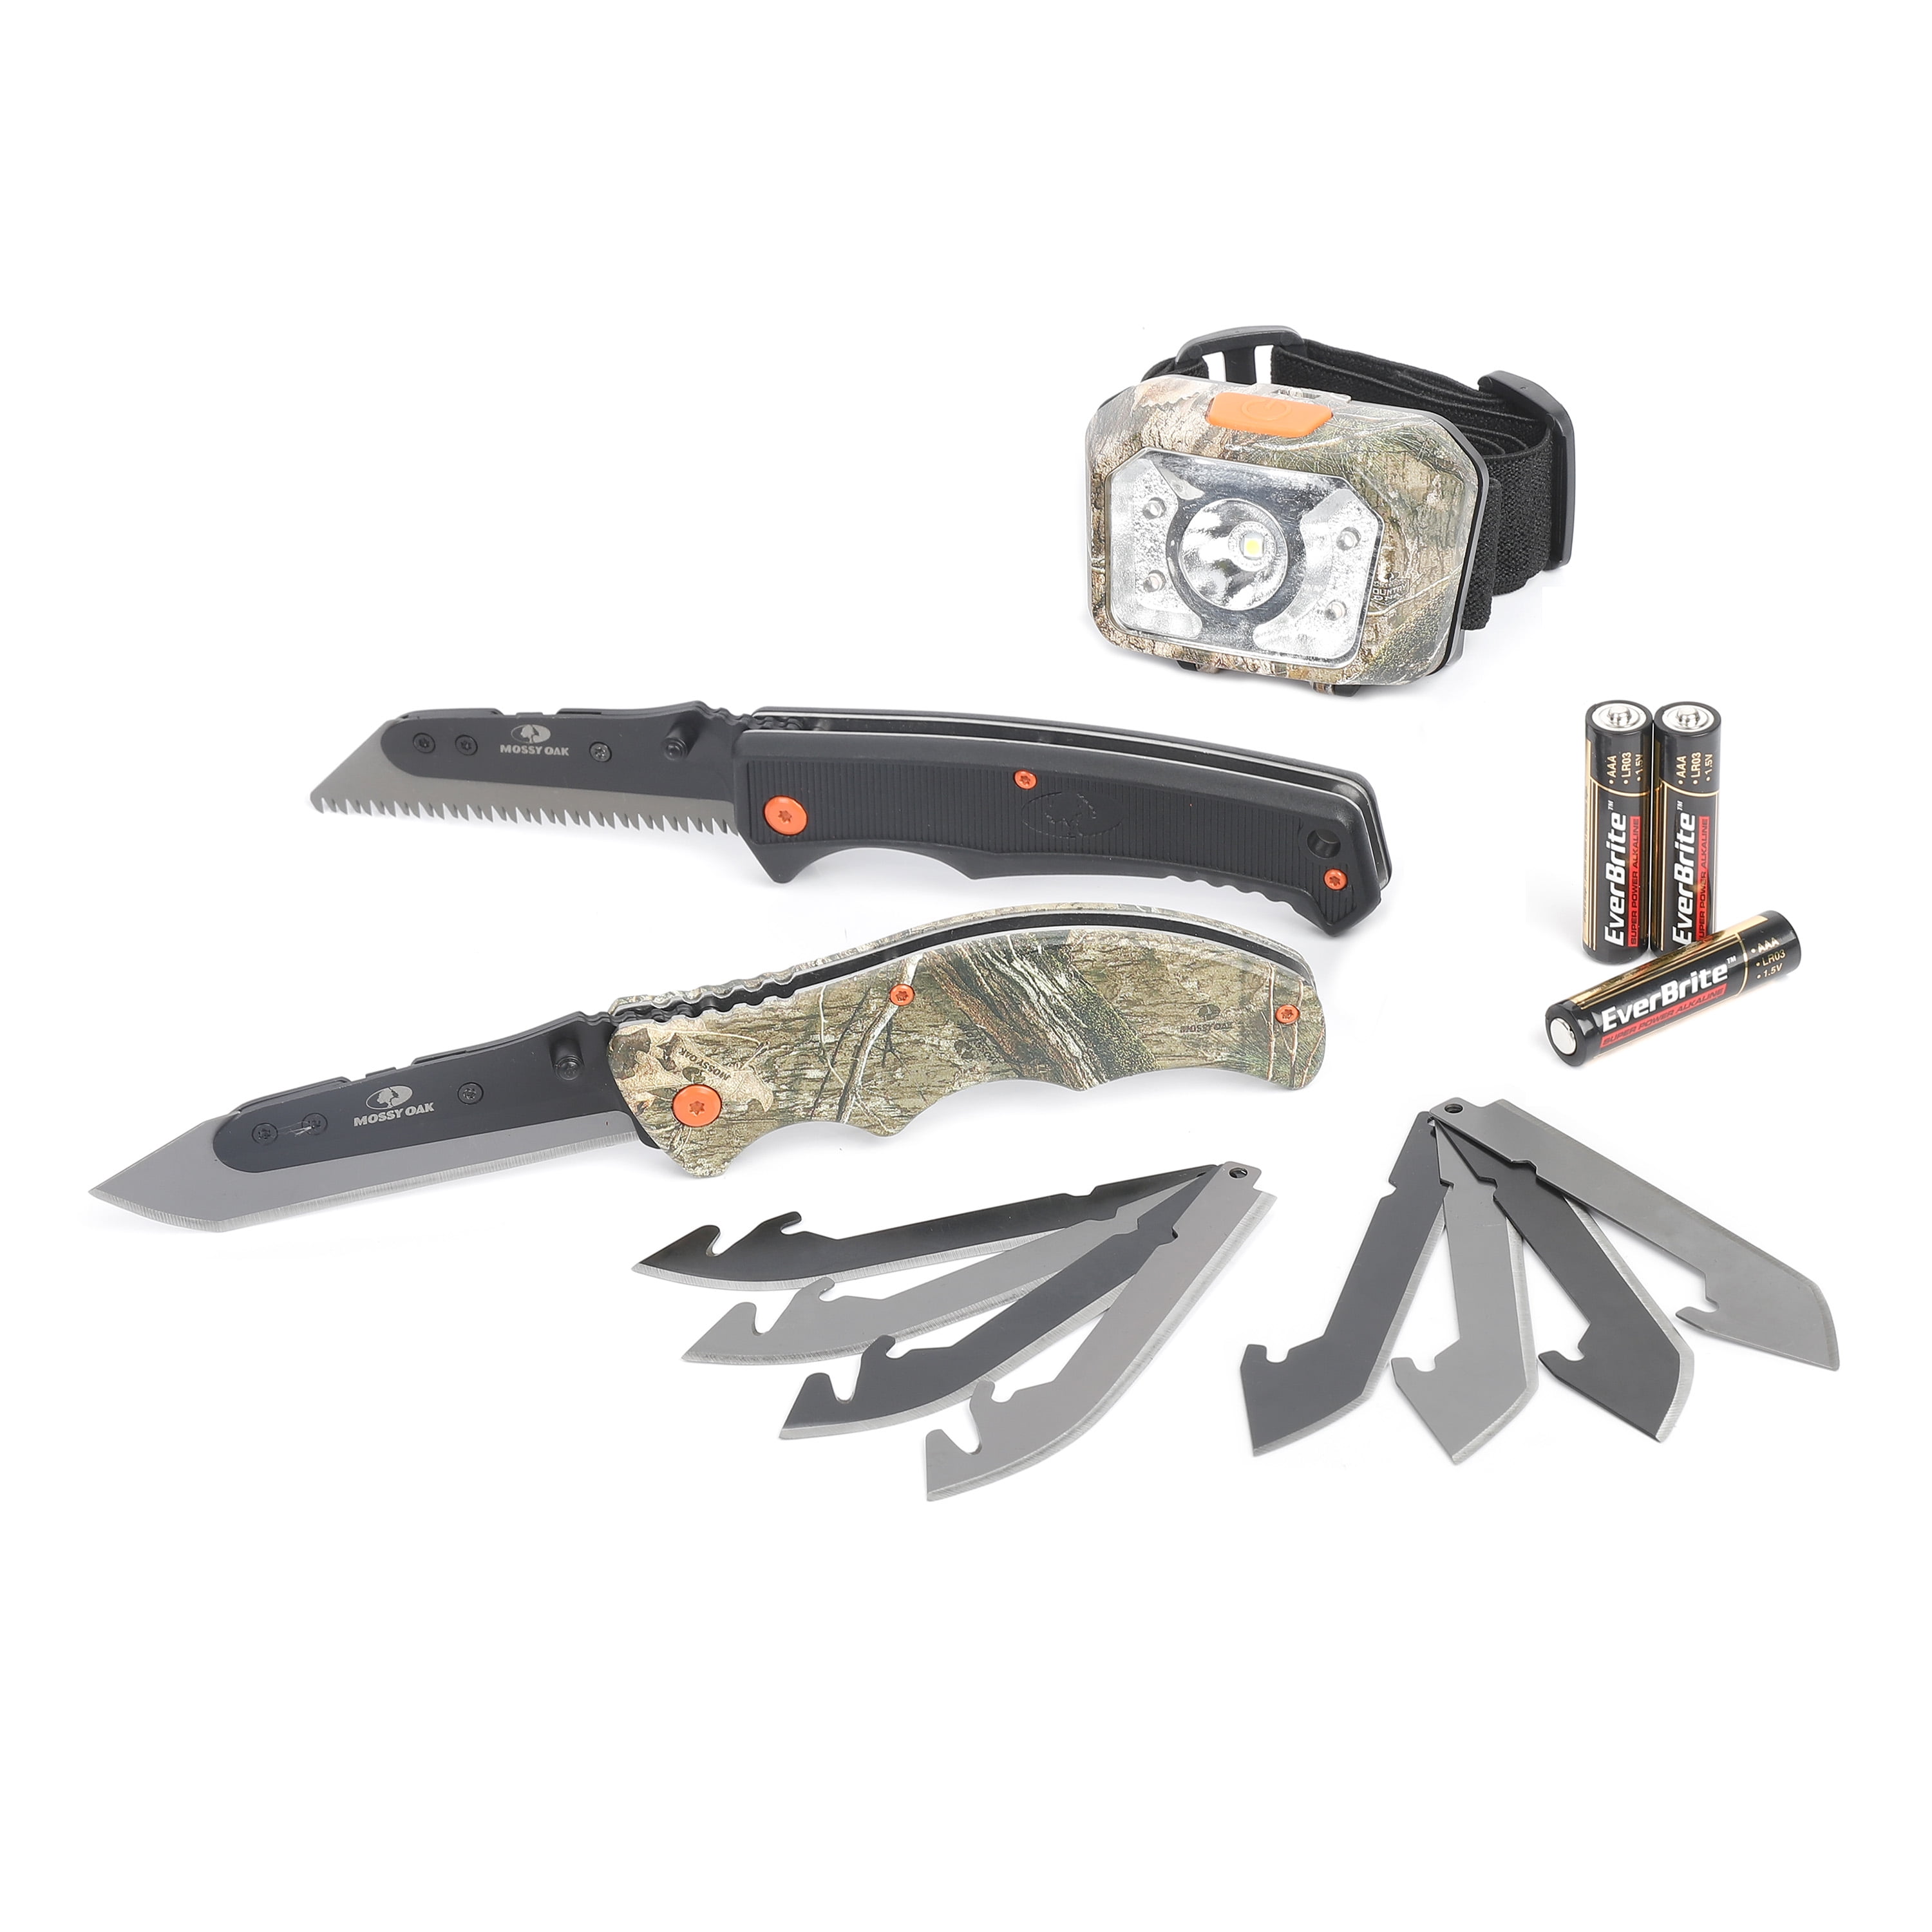  Hunting Field Dressing Kit, 11-Piece Portable Hunting Knife Set  with Camo Handle, Hunting Accessories Processor Set Gift for Men, Hunting  Stuff, Hunters Knives for Hunting, Survival, Fishing, Camping : Sports